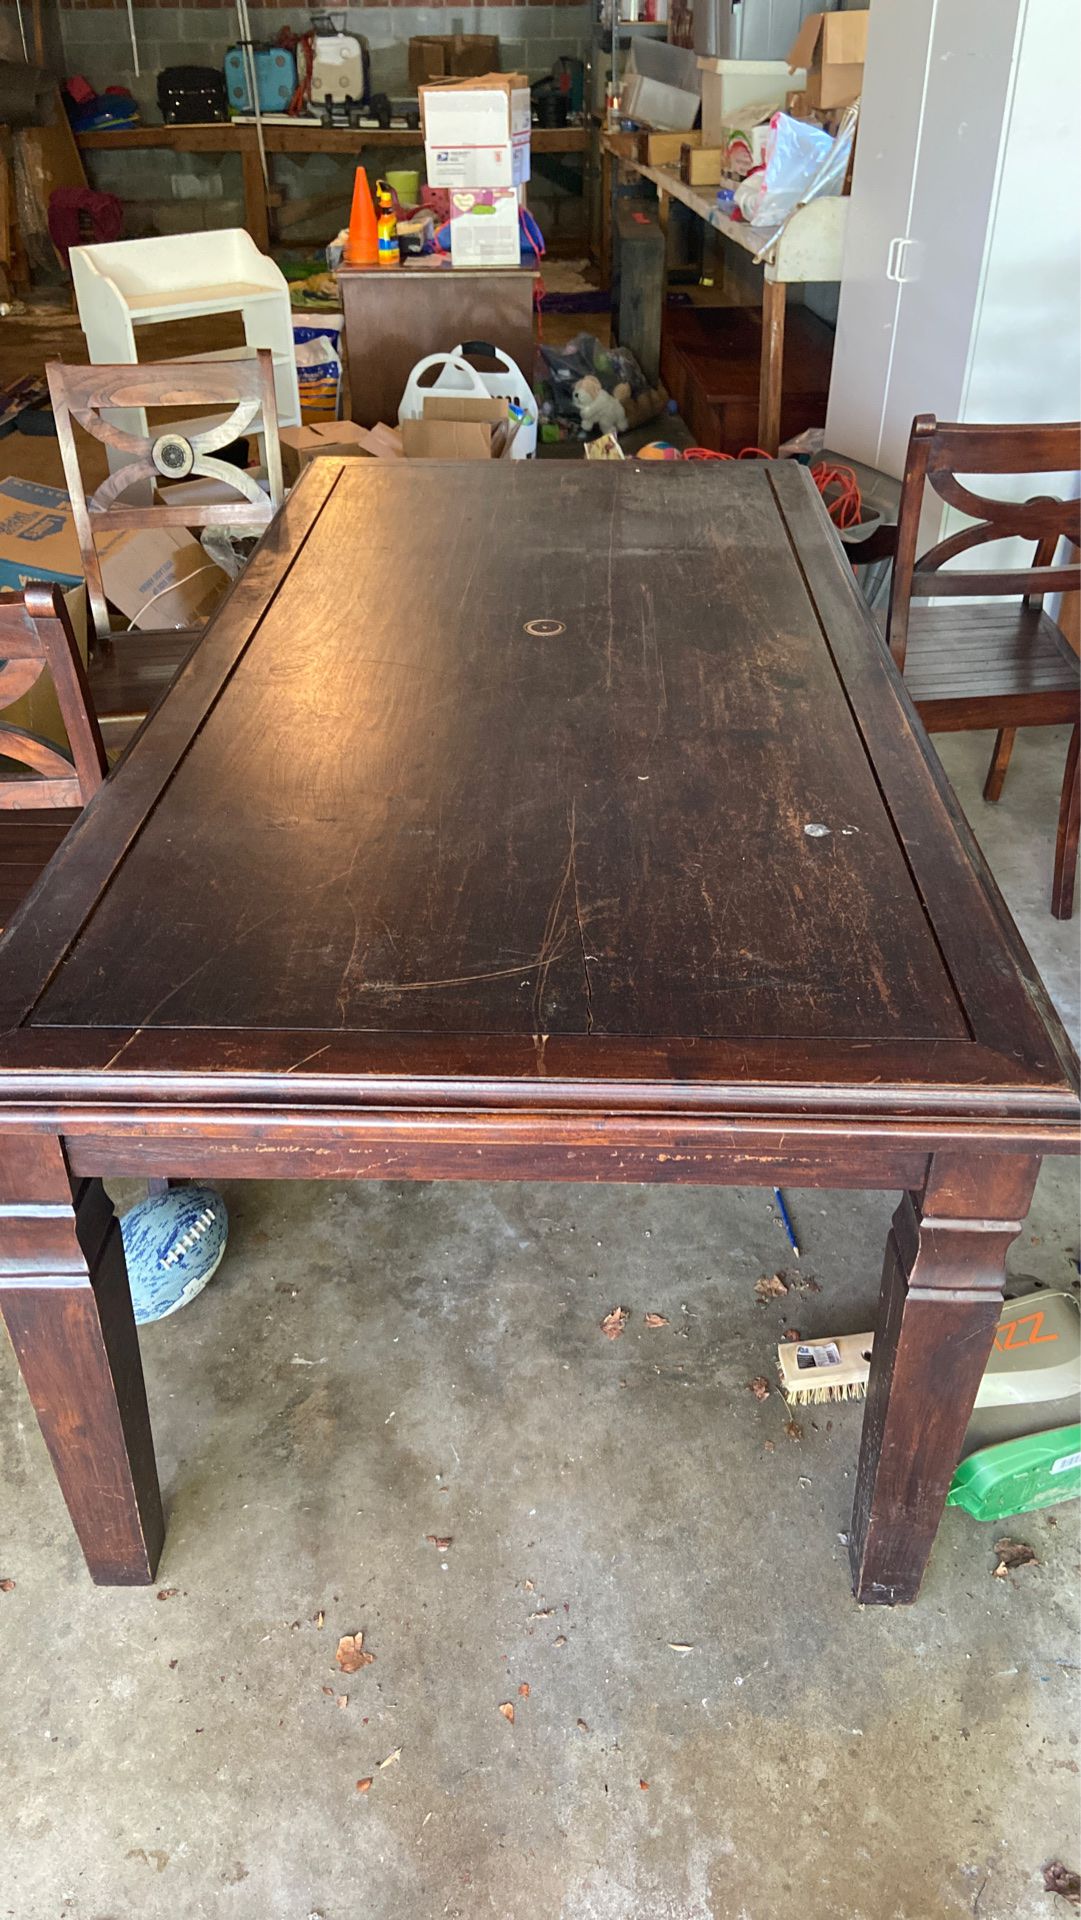 7 foot dining room table $100